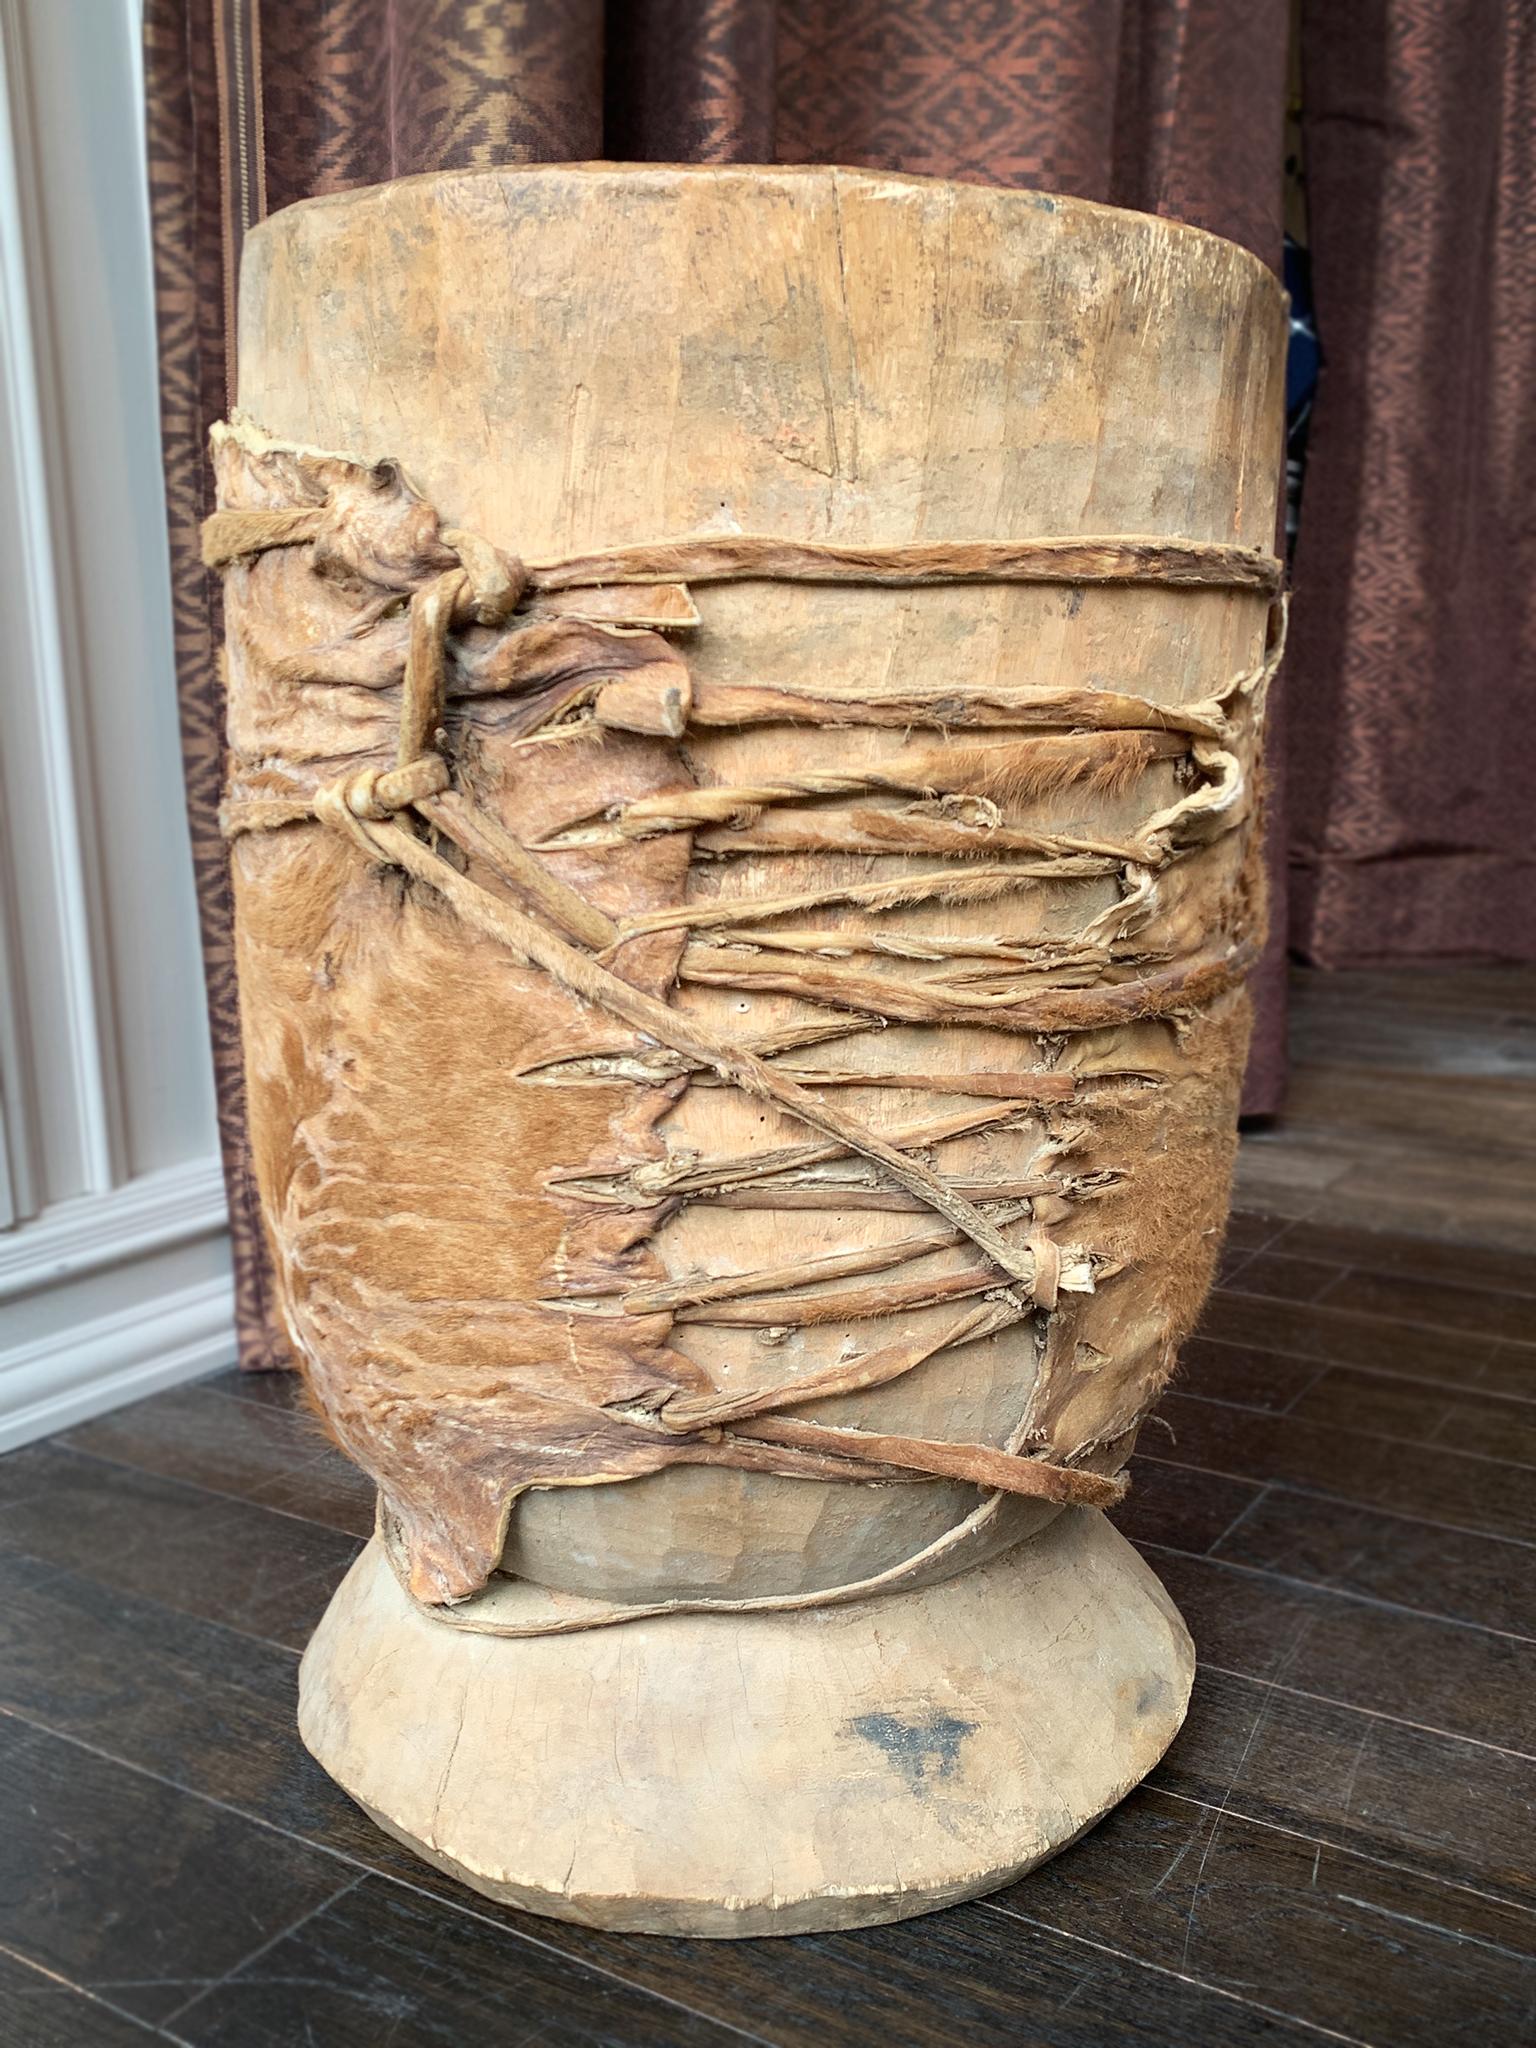 Made in the 19th Century, this vessel was hand-carved from hornbeam wood and has  substantial weight. It is wrapped in a leather hide. We love the beautifully tactile and naturally weathered surfaces that give the vessel a sense of time and history.